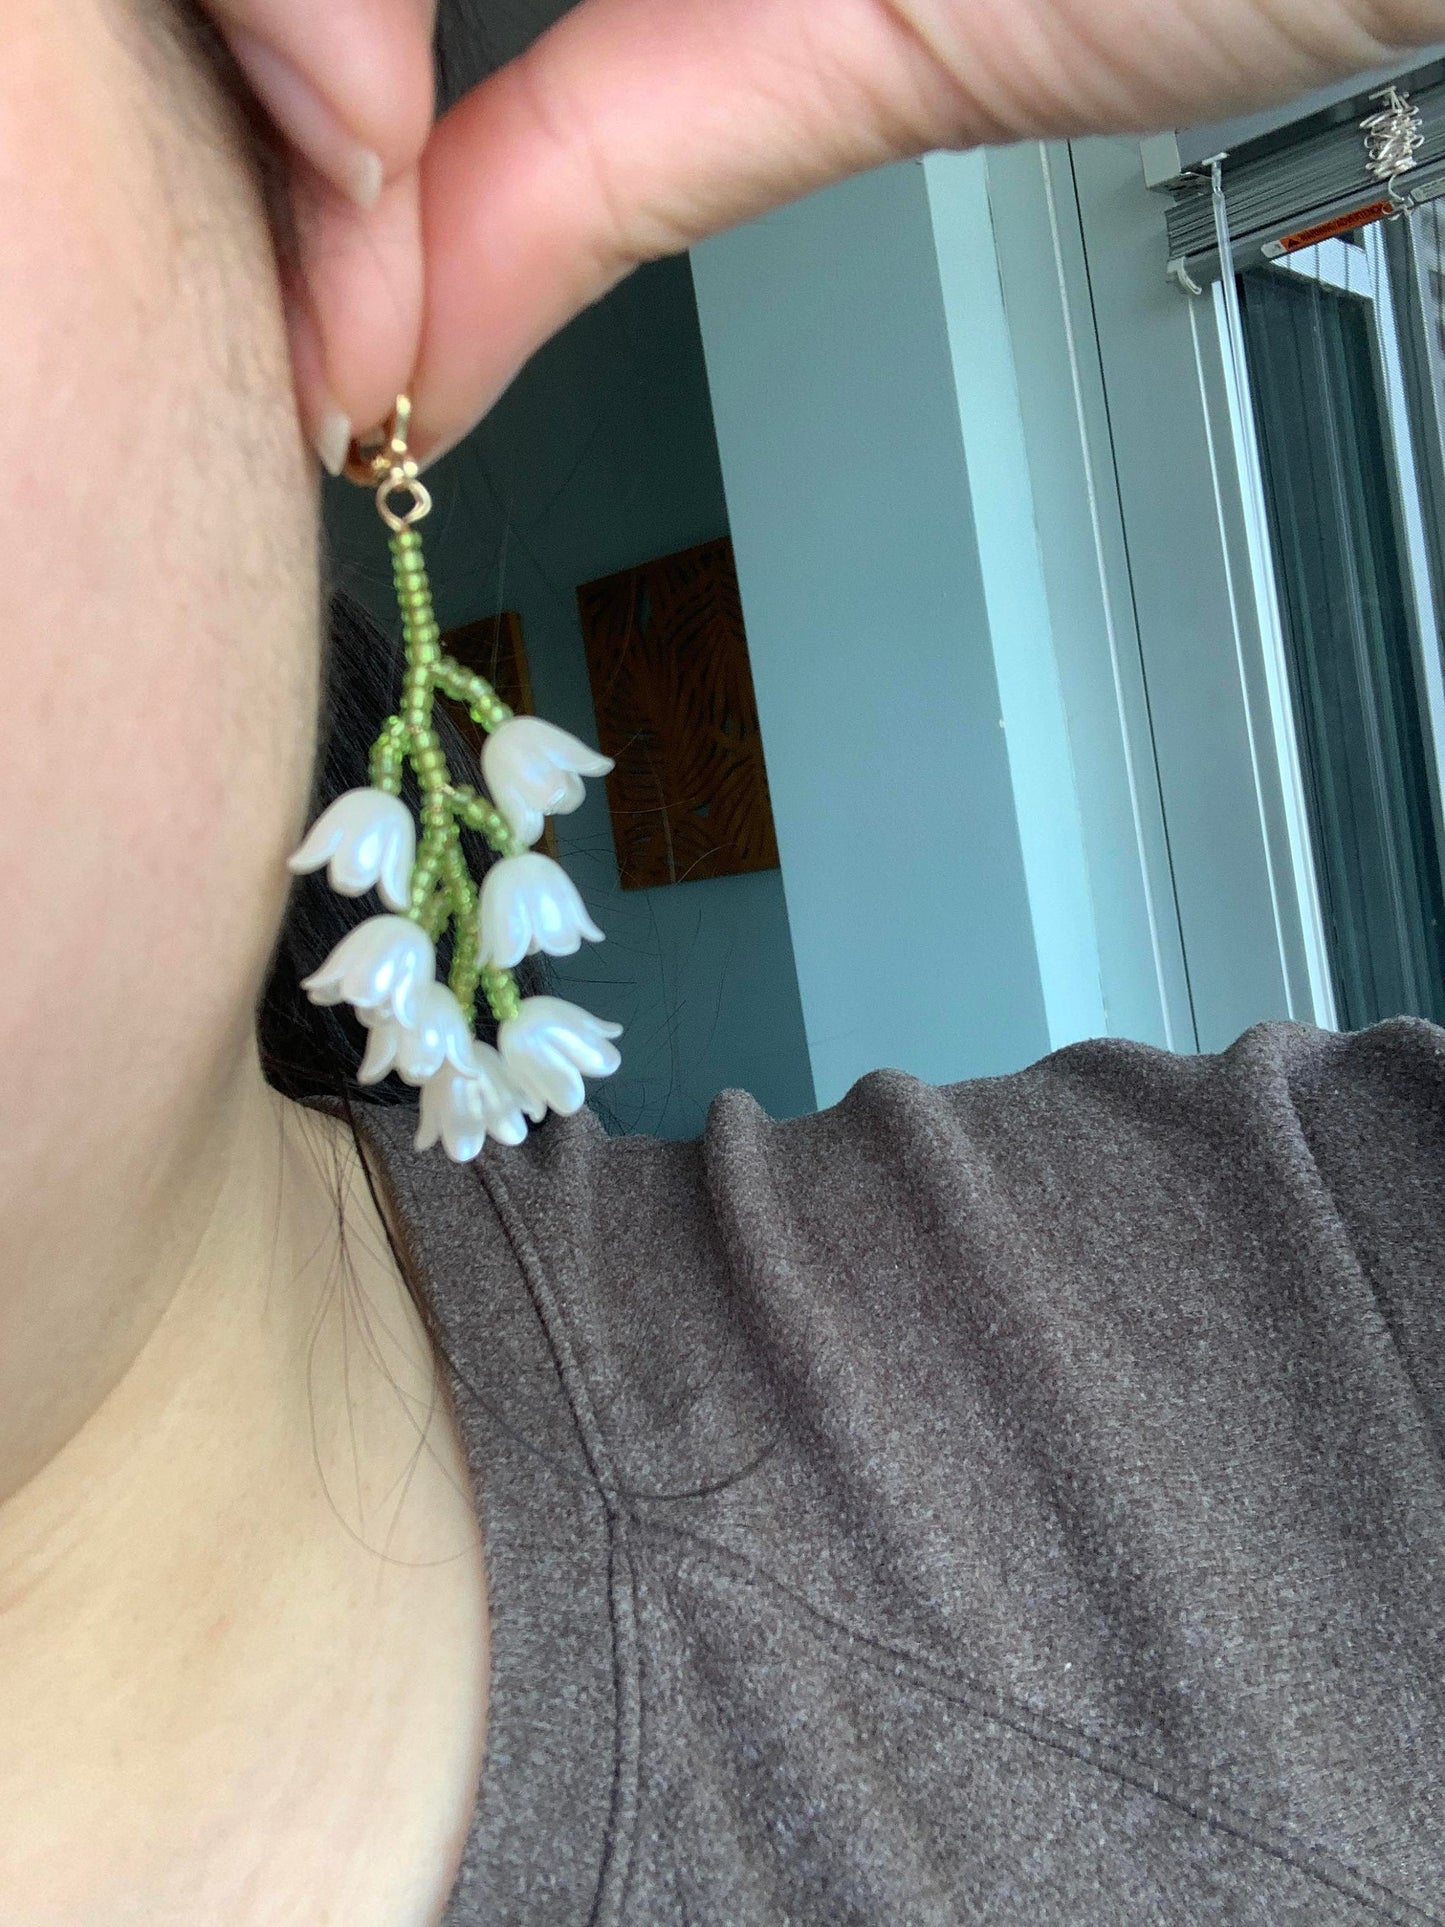 Unique Beaded Lily of the Valley Earrings